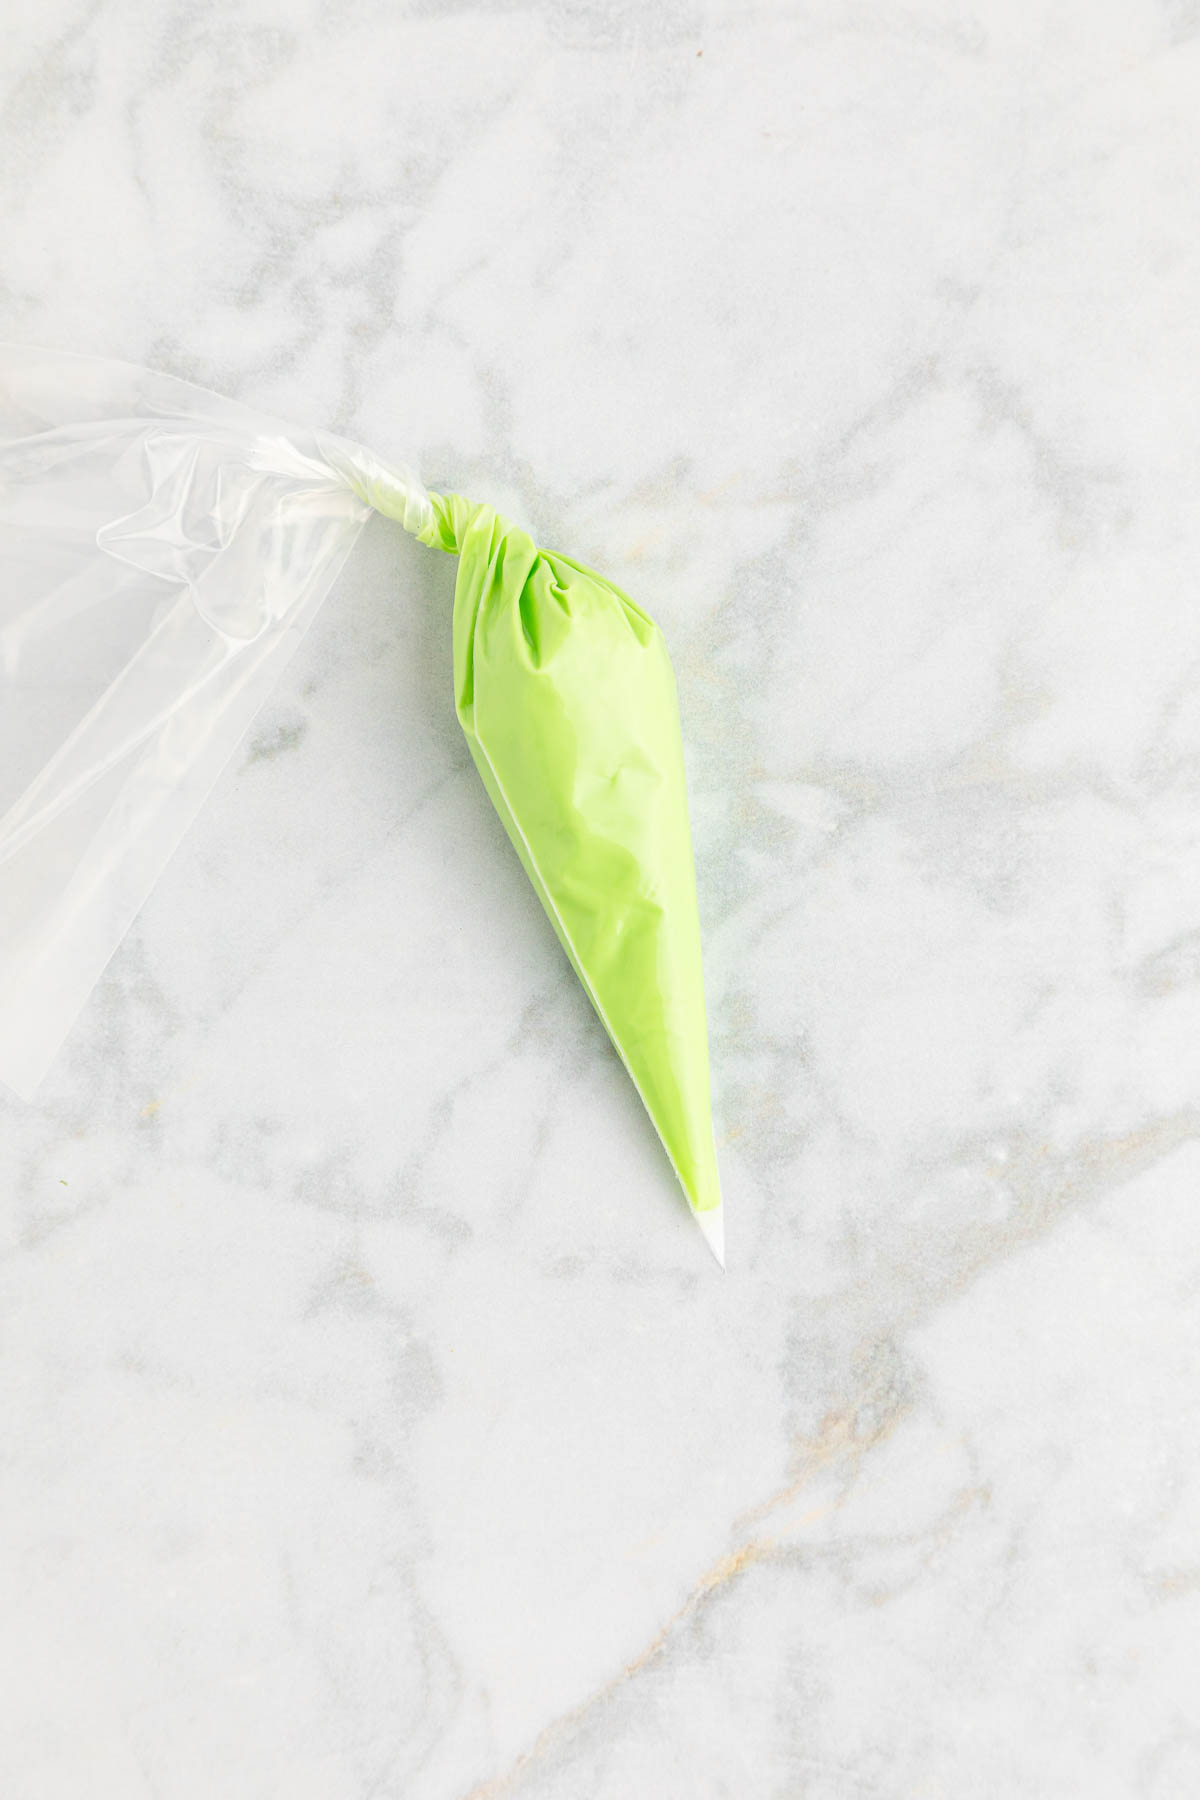 A green plastic piping bag on a marble surface.